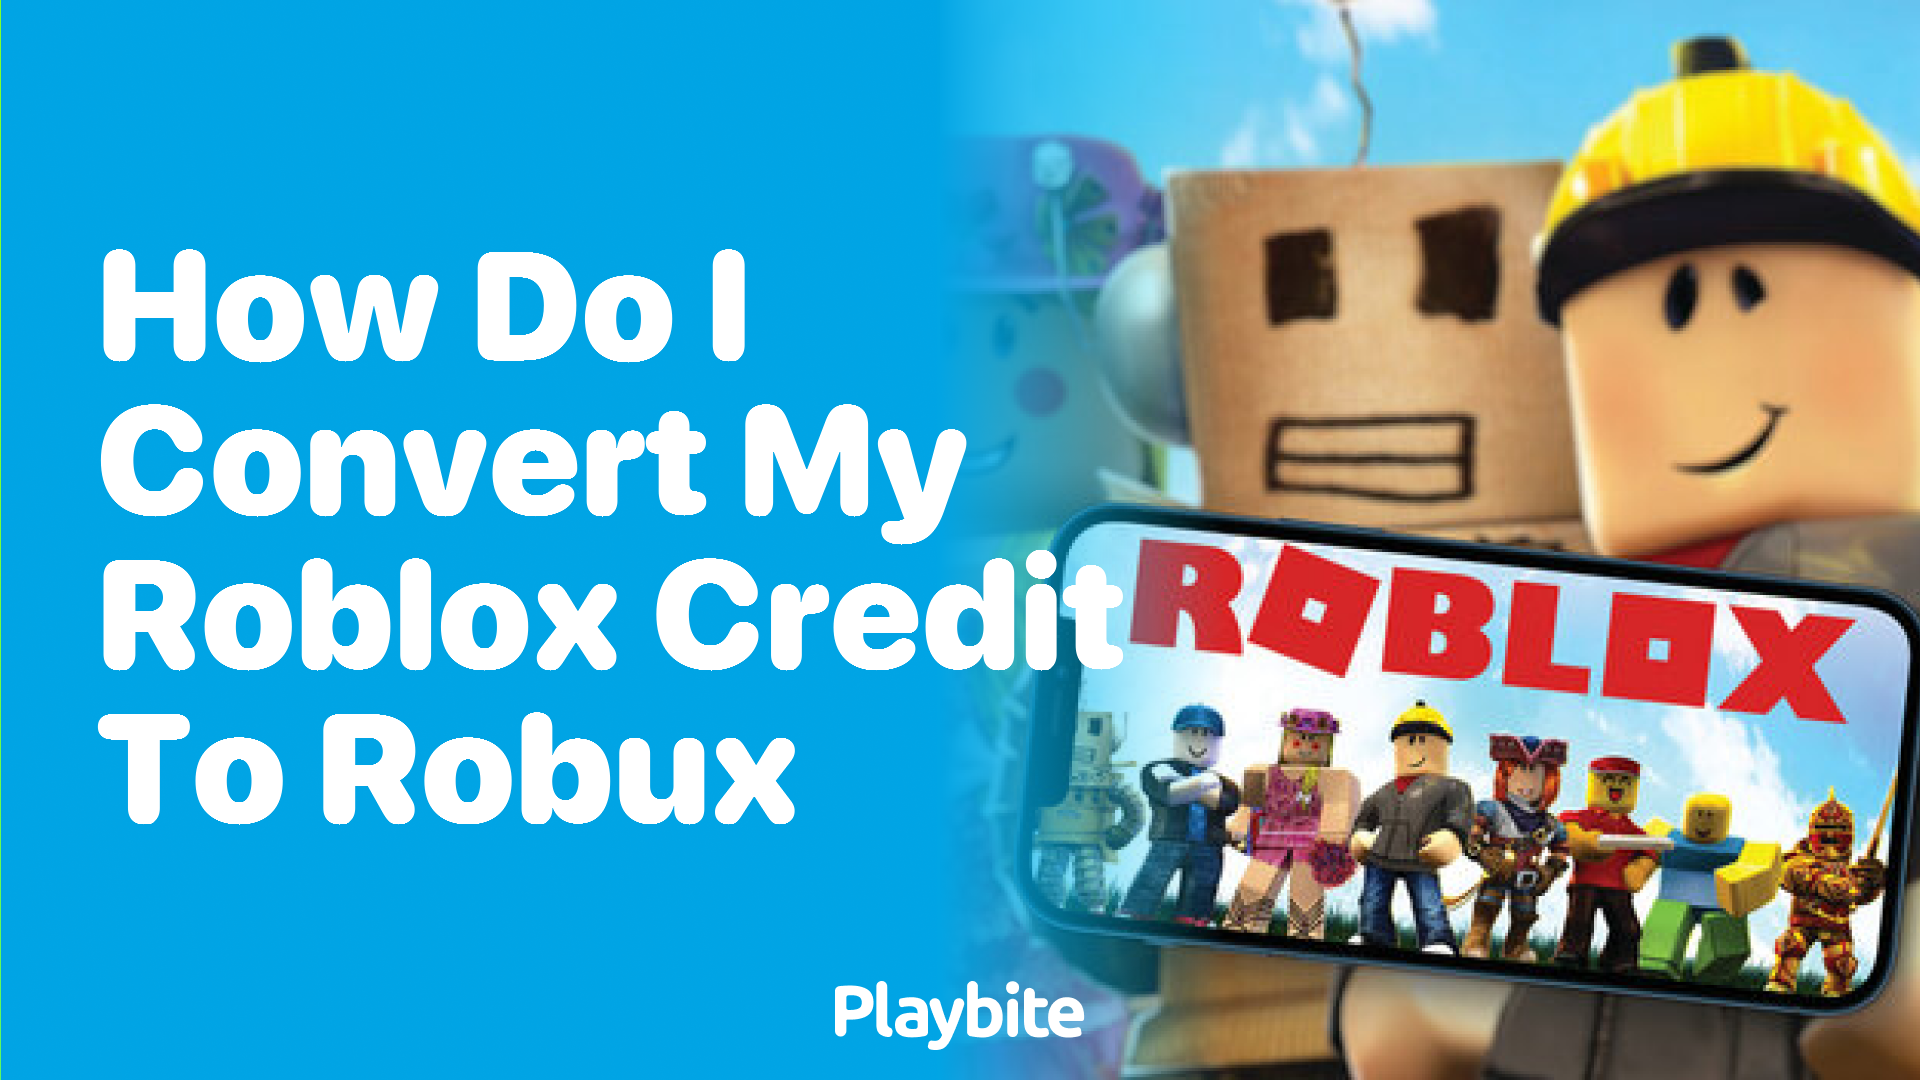 How Do I Convert My Roblox Credit to Robux?